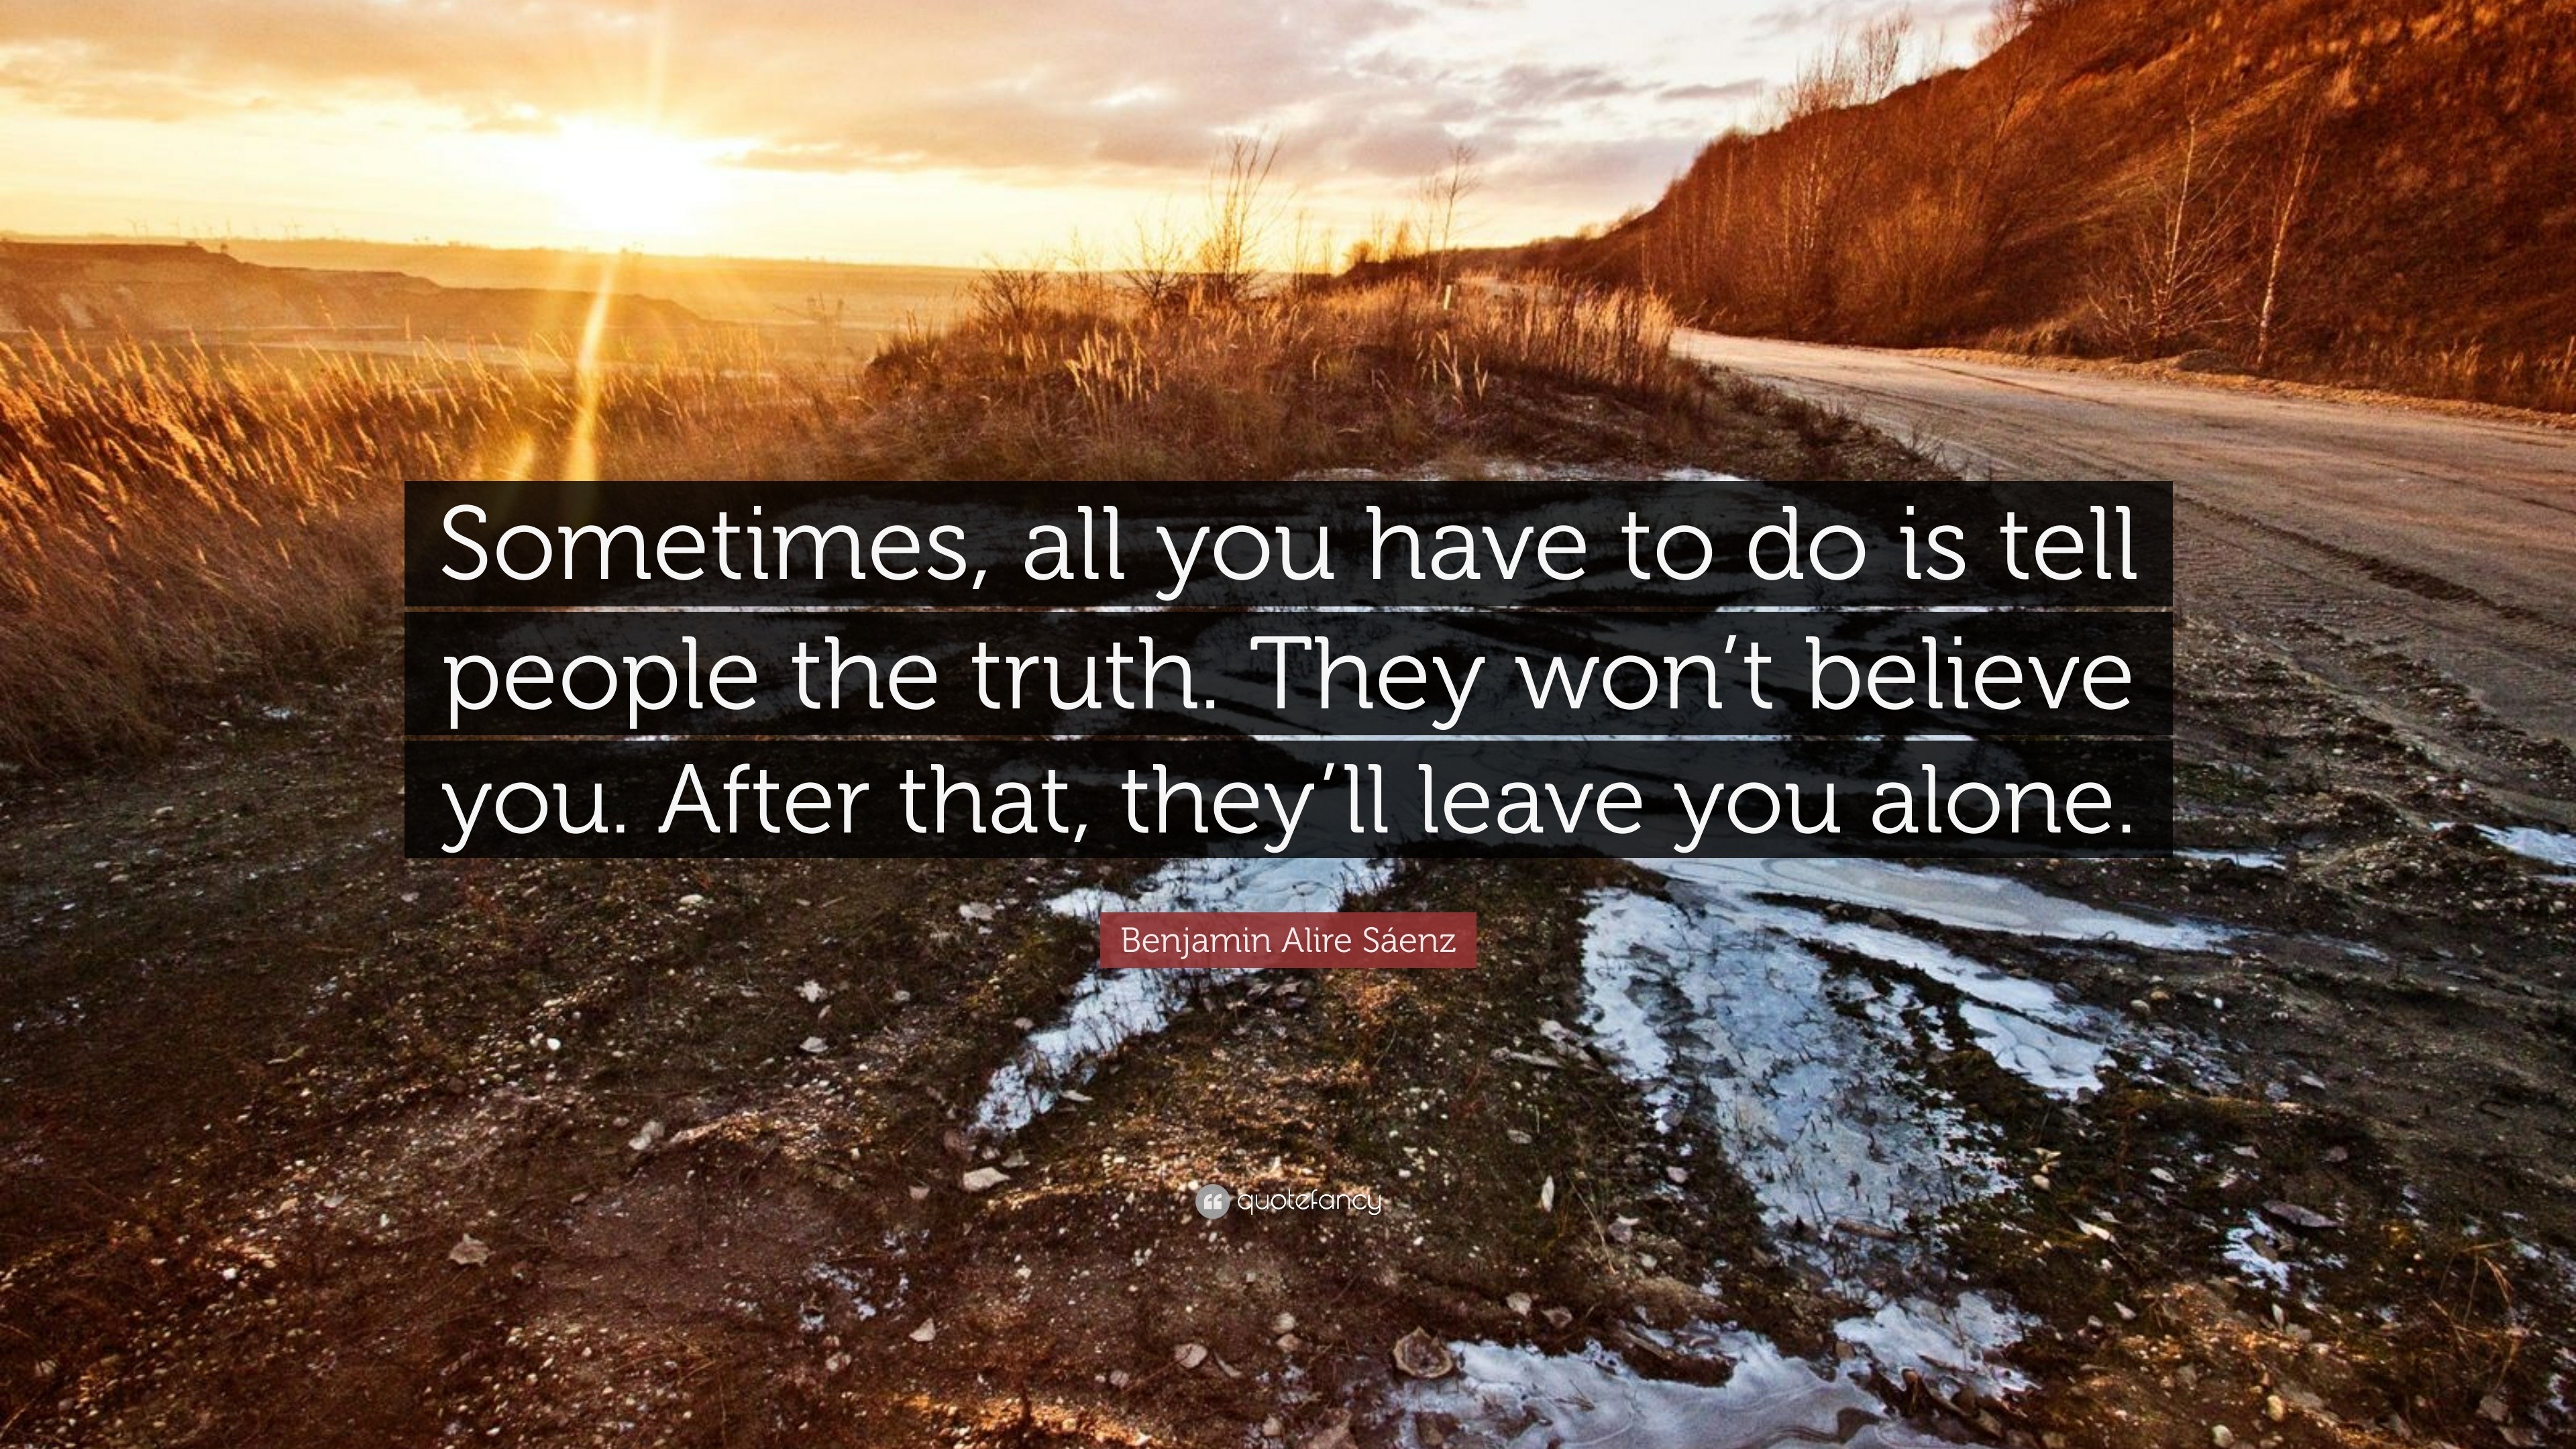 Benjamin Alire Saenz Quote Sometimes All You Have To Do Is Tell People The Truth They Won T Believe You After That They Ll Leave You Alone 7 Wallpapers Quotefancy